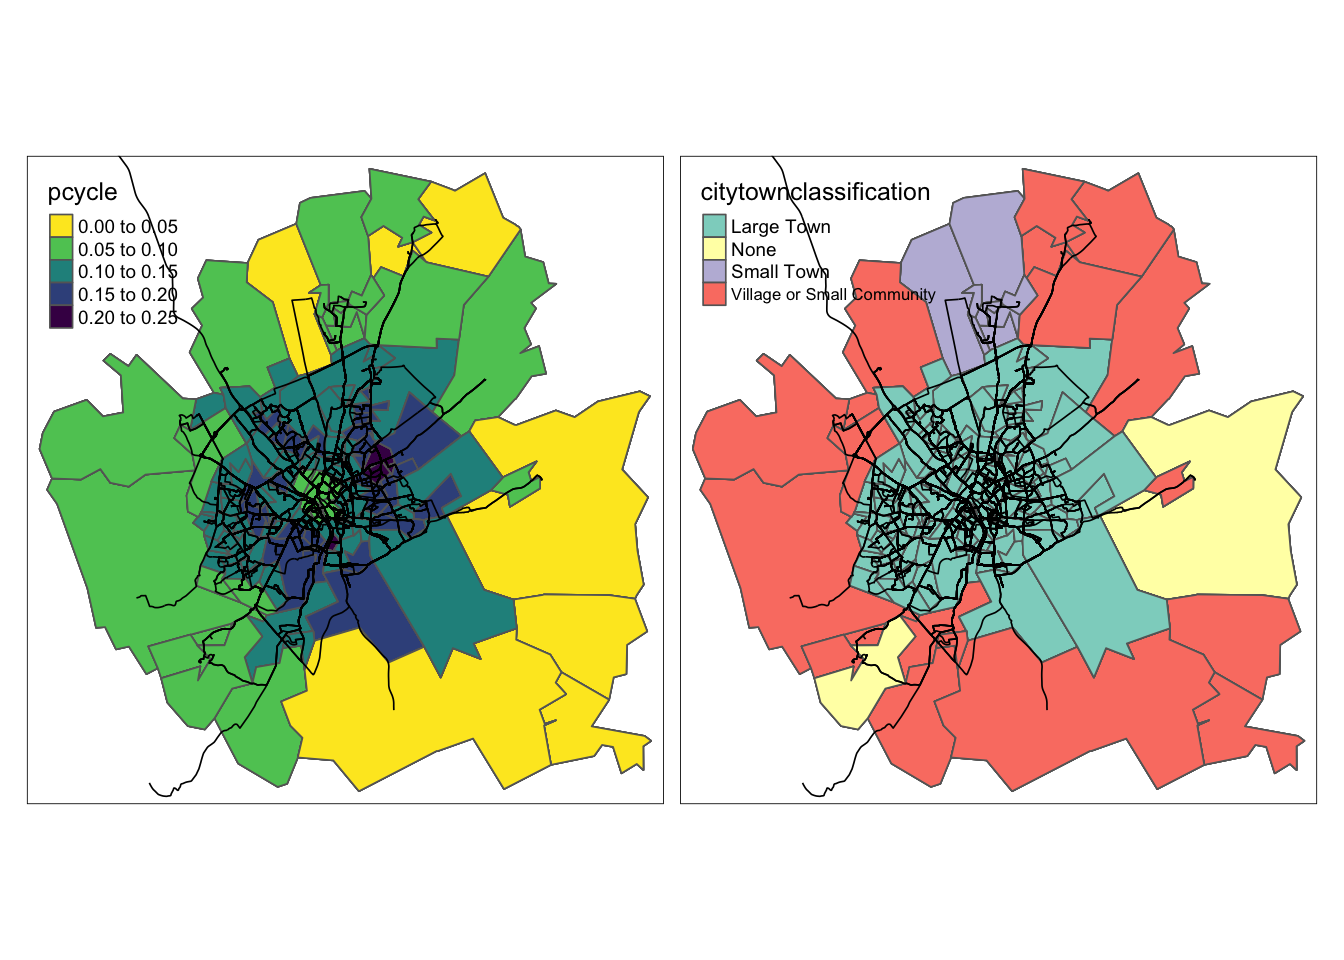 Zones in York with colours representing cycling mode share (left) and urban functional classification (right)